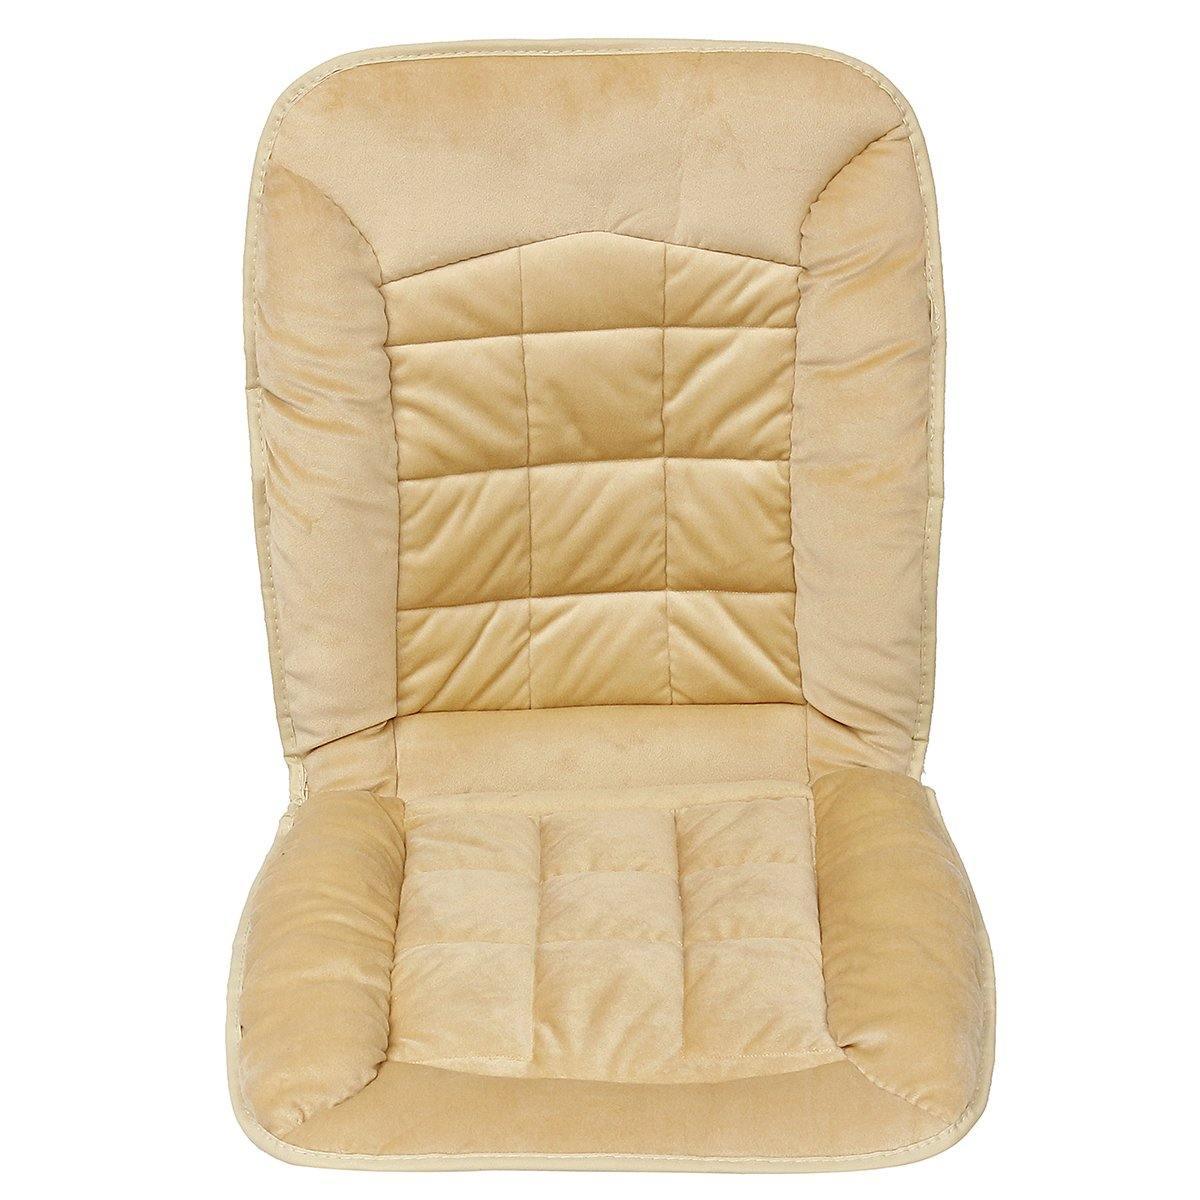 ezy2find Plush Car Front Seat Cushion Comfortable Beige Plush Car Front Seat Cushion Comfortable Winter Warmer Cover Pad Chair Protector Universal